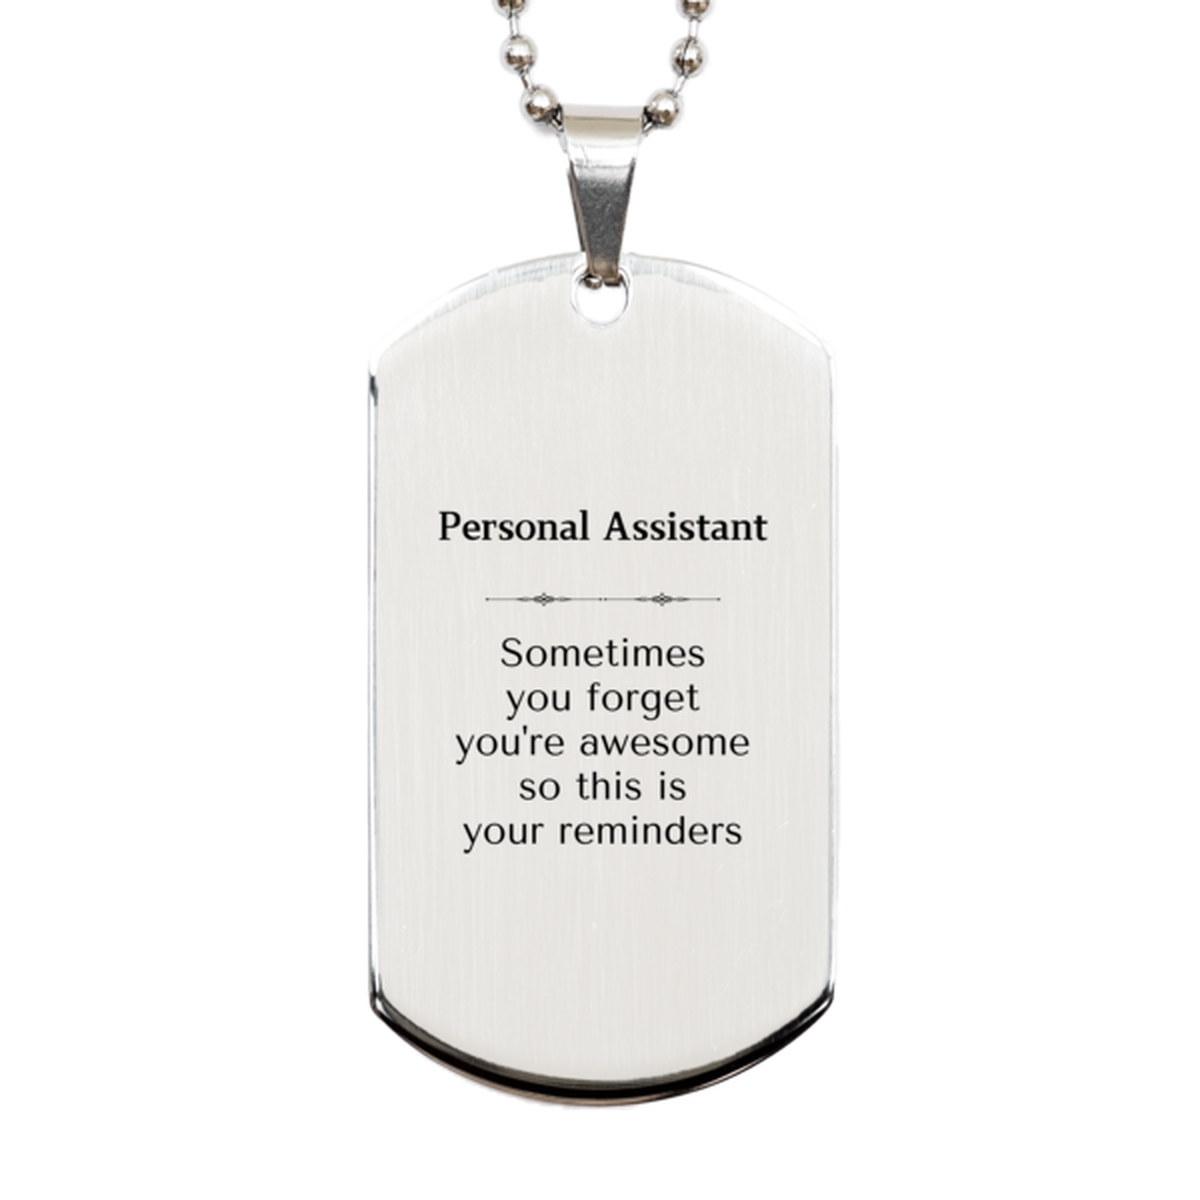 Sentimental Personal Assistant Silver Dog Tag, Personal Assistant Sometimes you forget you're awesome so this is your reminders, Graduation Christmas Birthday Gifts for Personal Assistant, Men, Women, Coworkers